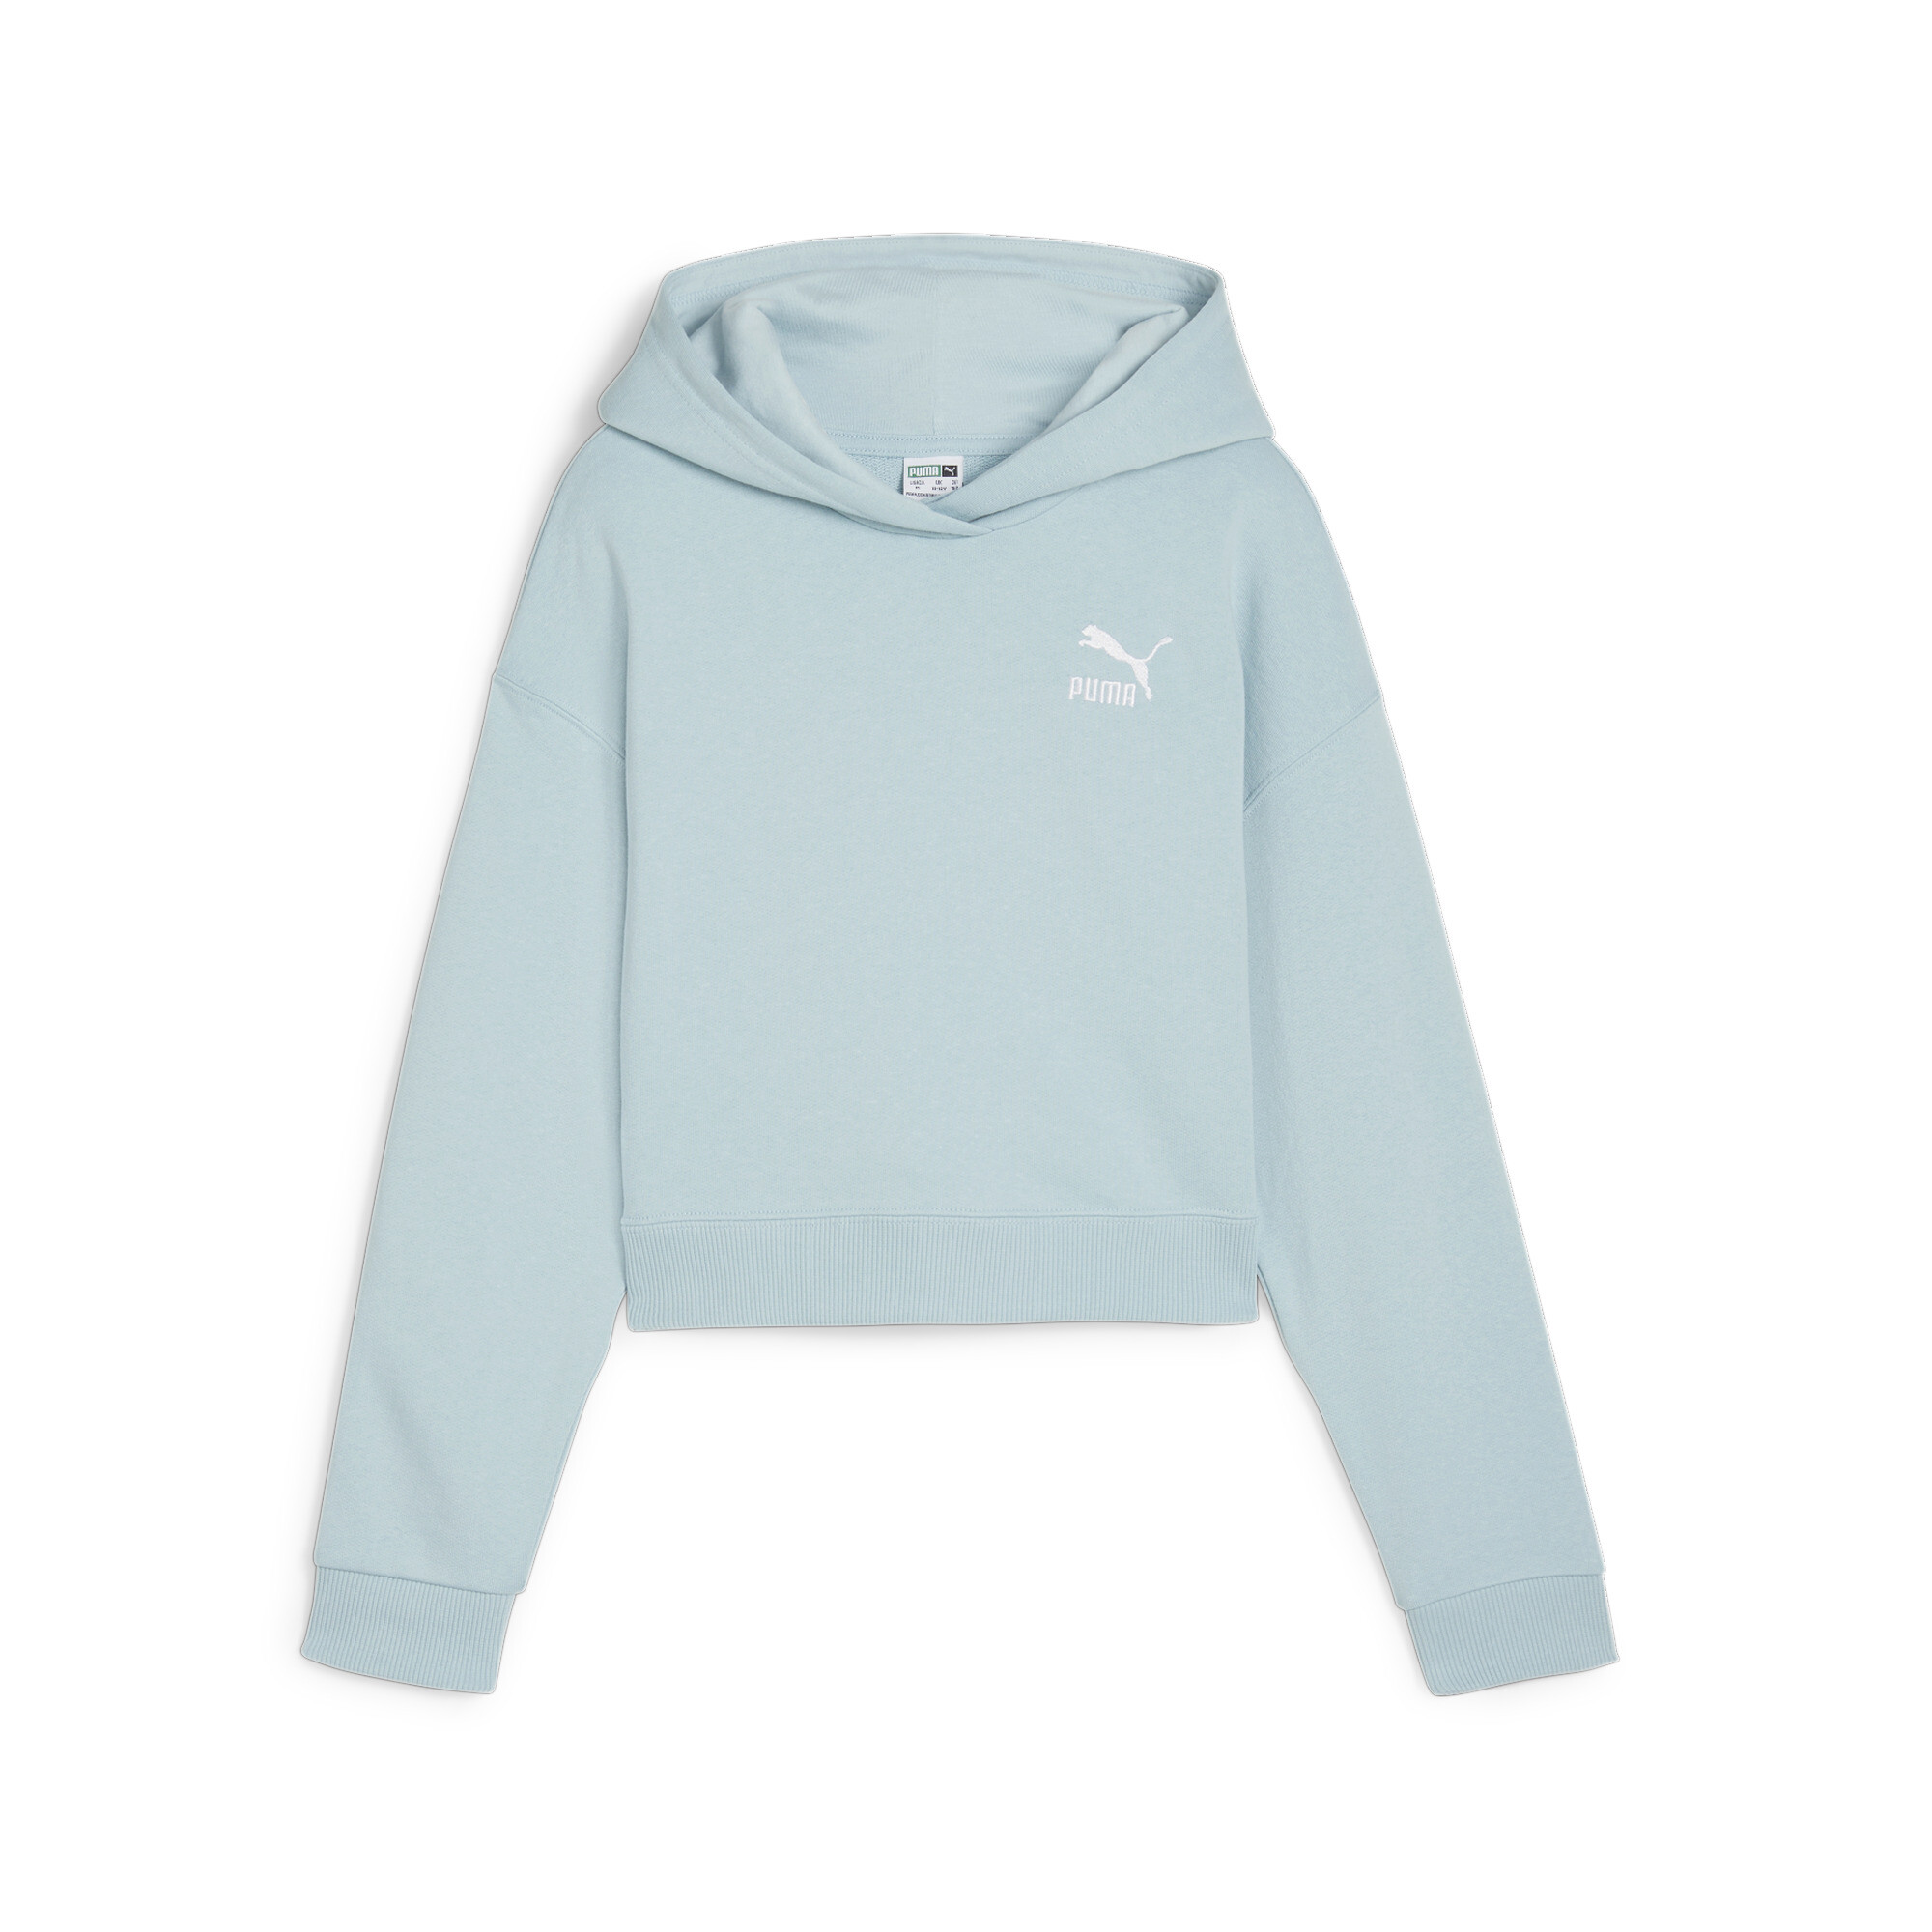 PUMA BETTER CLASSICS Girls' Hoodie In Blue, Size 15-16 Youth